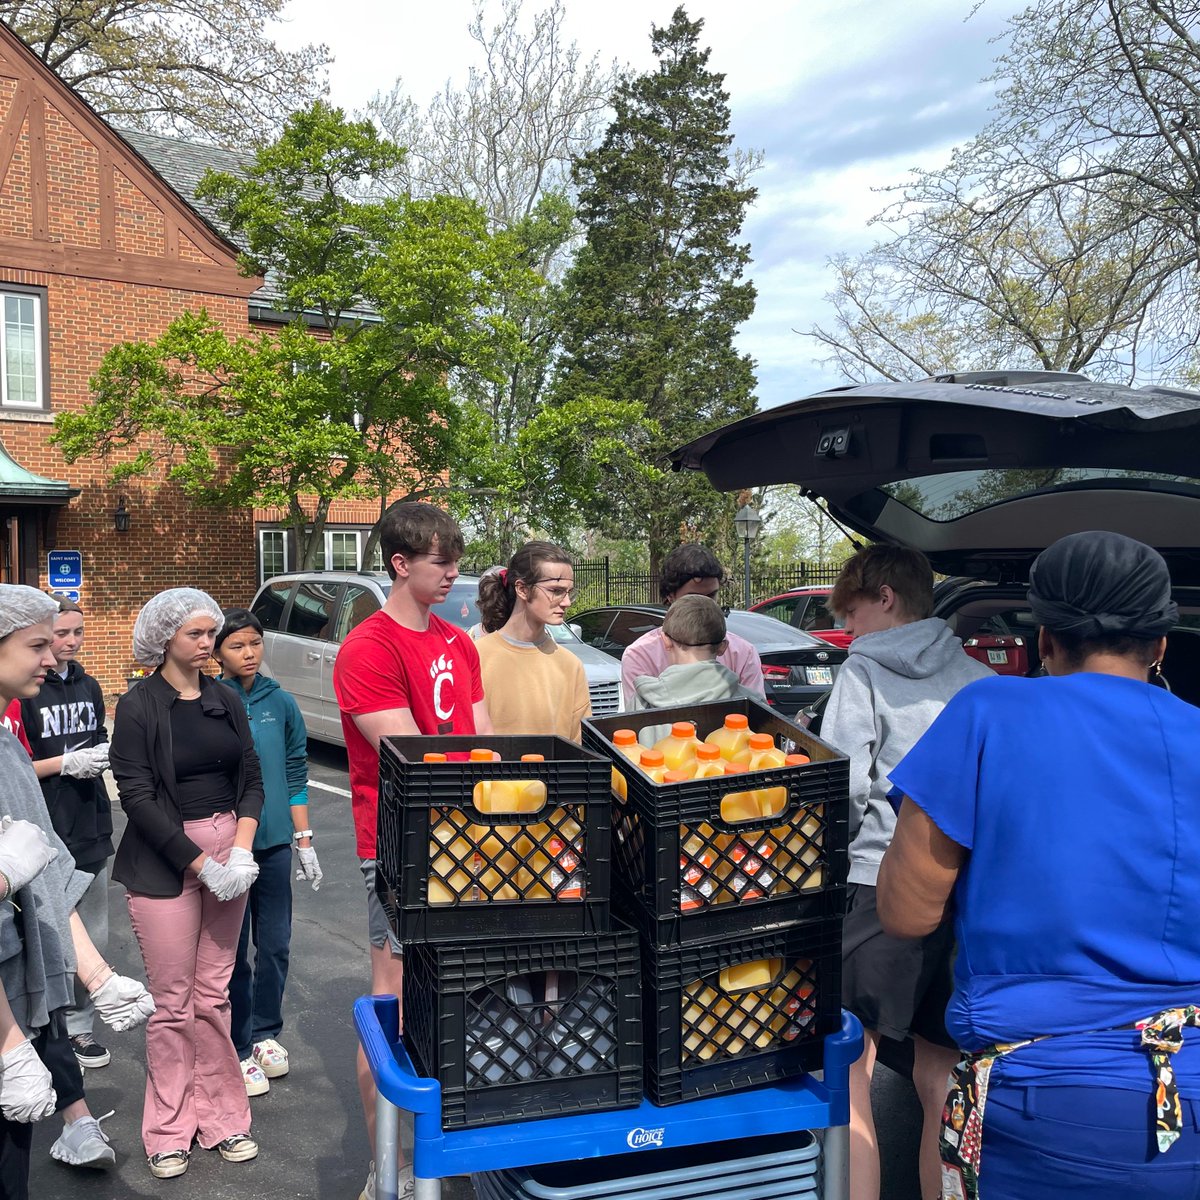 🌟 The Aspire program visited Food for the Soul last week to build their personal and professional skills - all while making a difference in the community! Students helped prepare meals for people in need, received a tour and participated in a career panel. #EveryMomentMatters